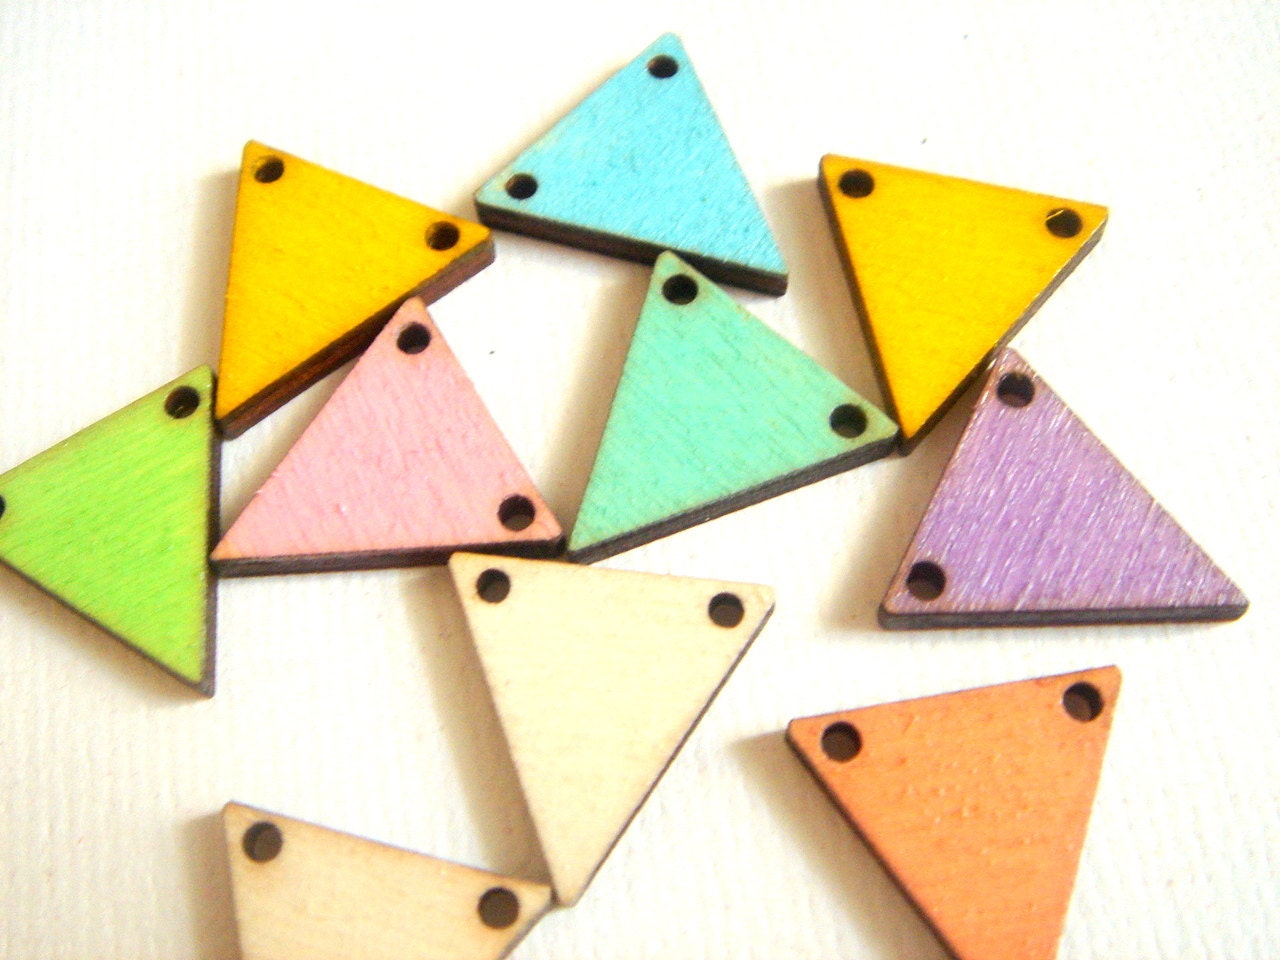 Popular items for wood triangles on Etsy